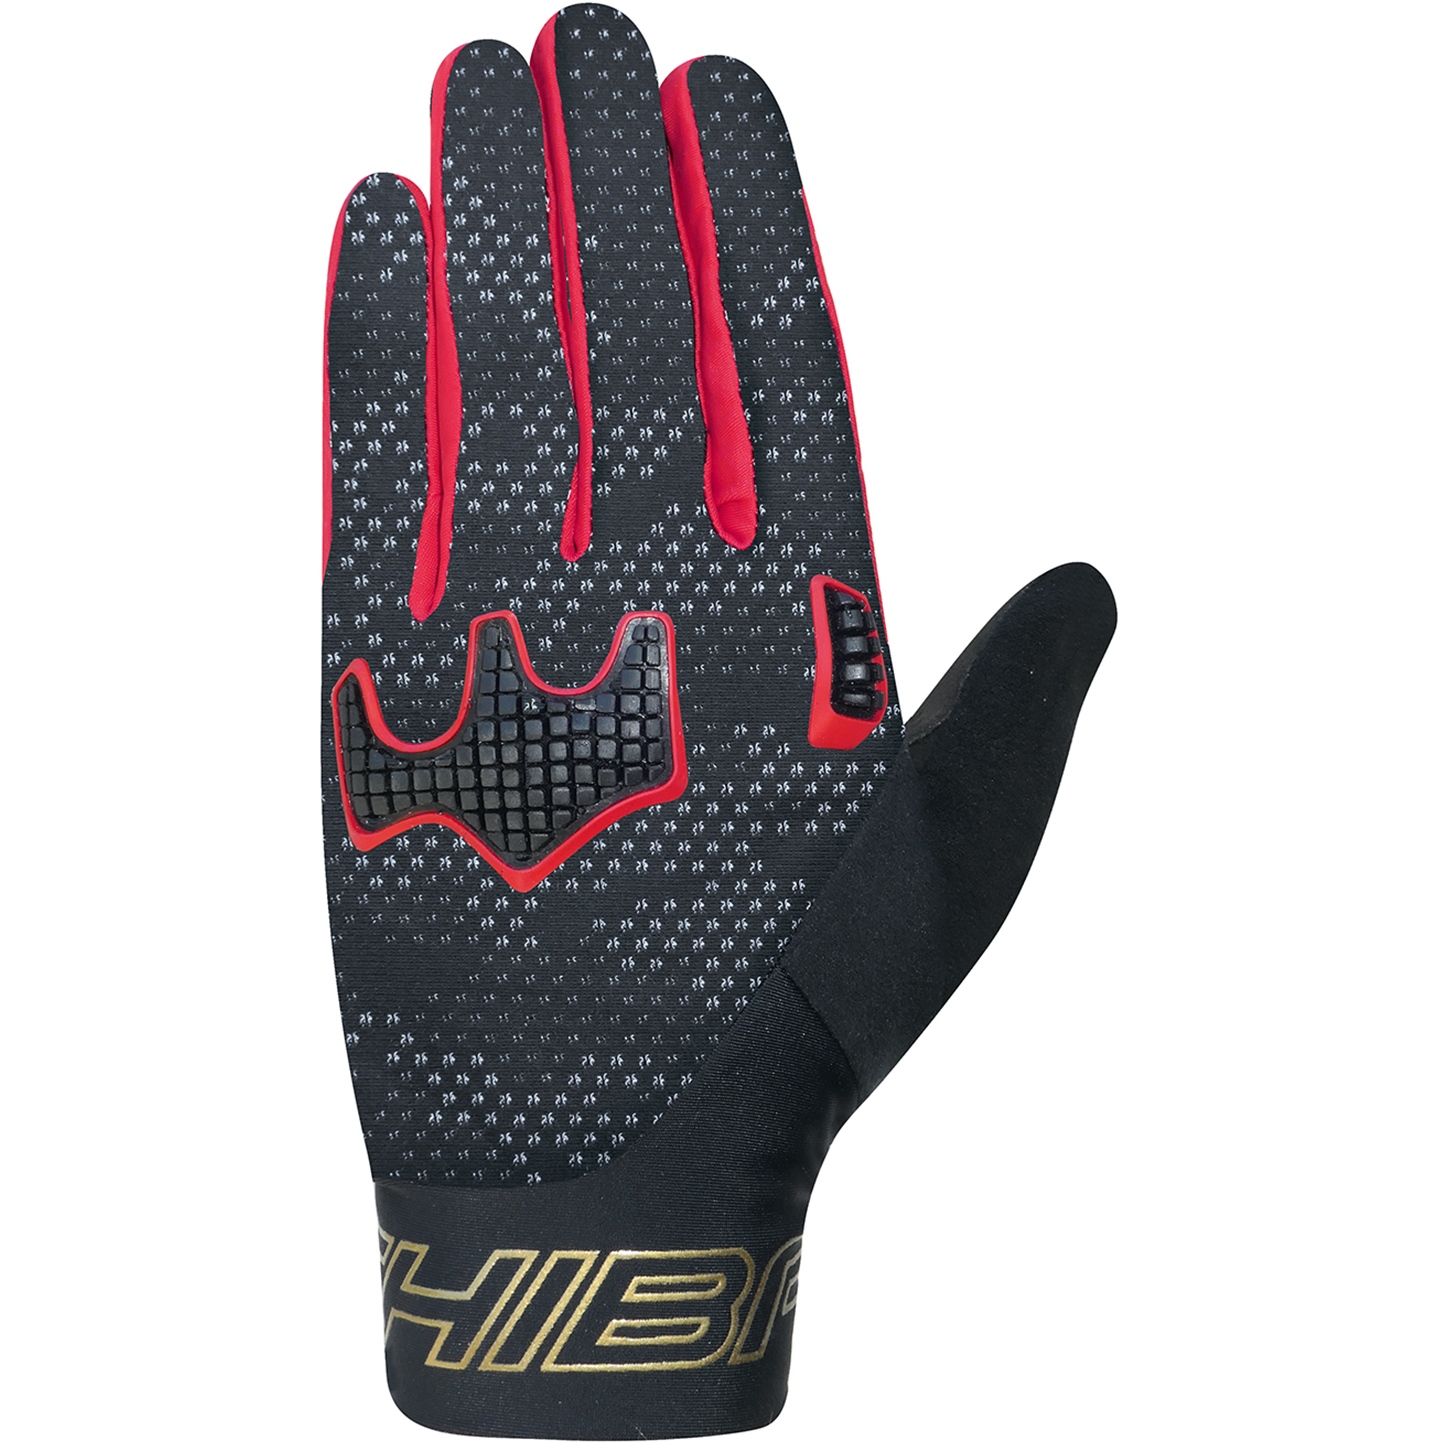 Image of Chiba Infinity Cycling Gloves - black/red